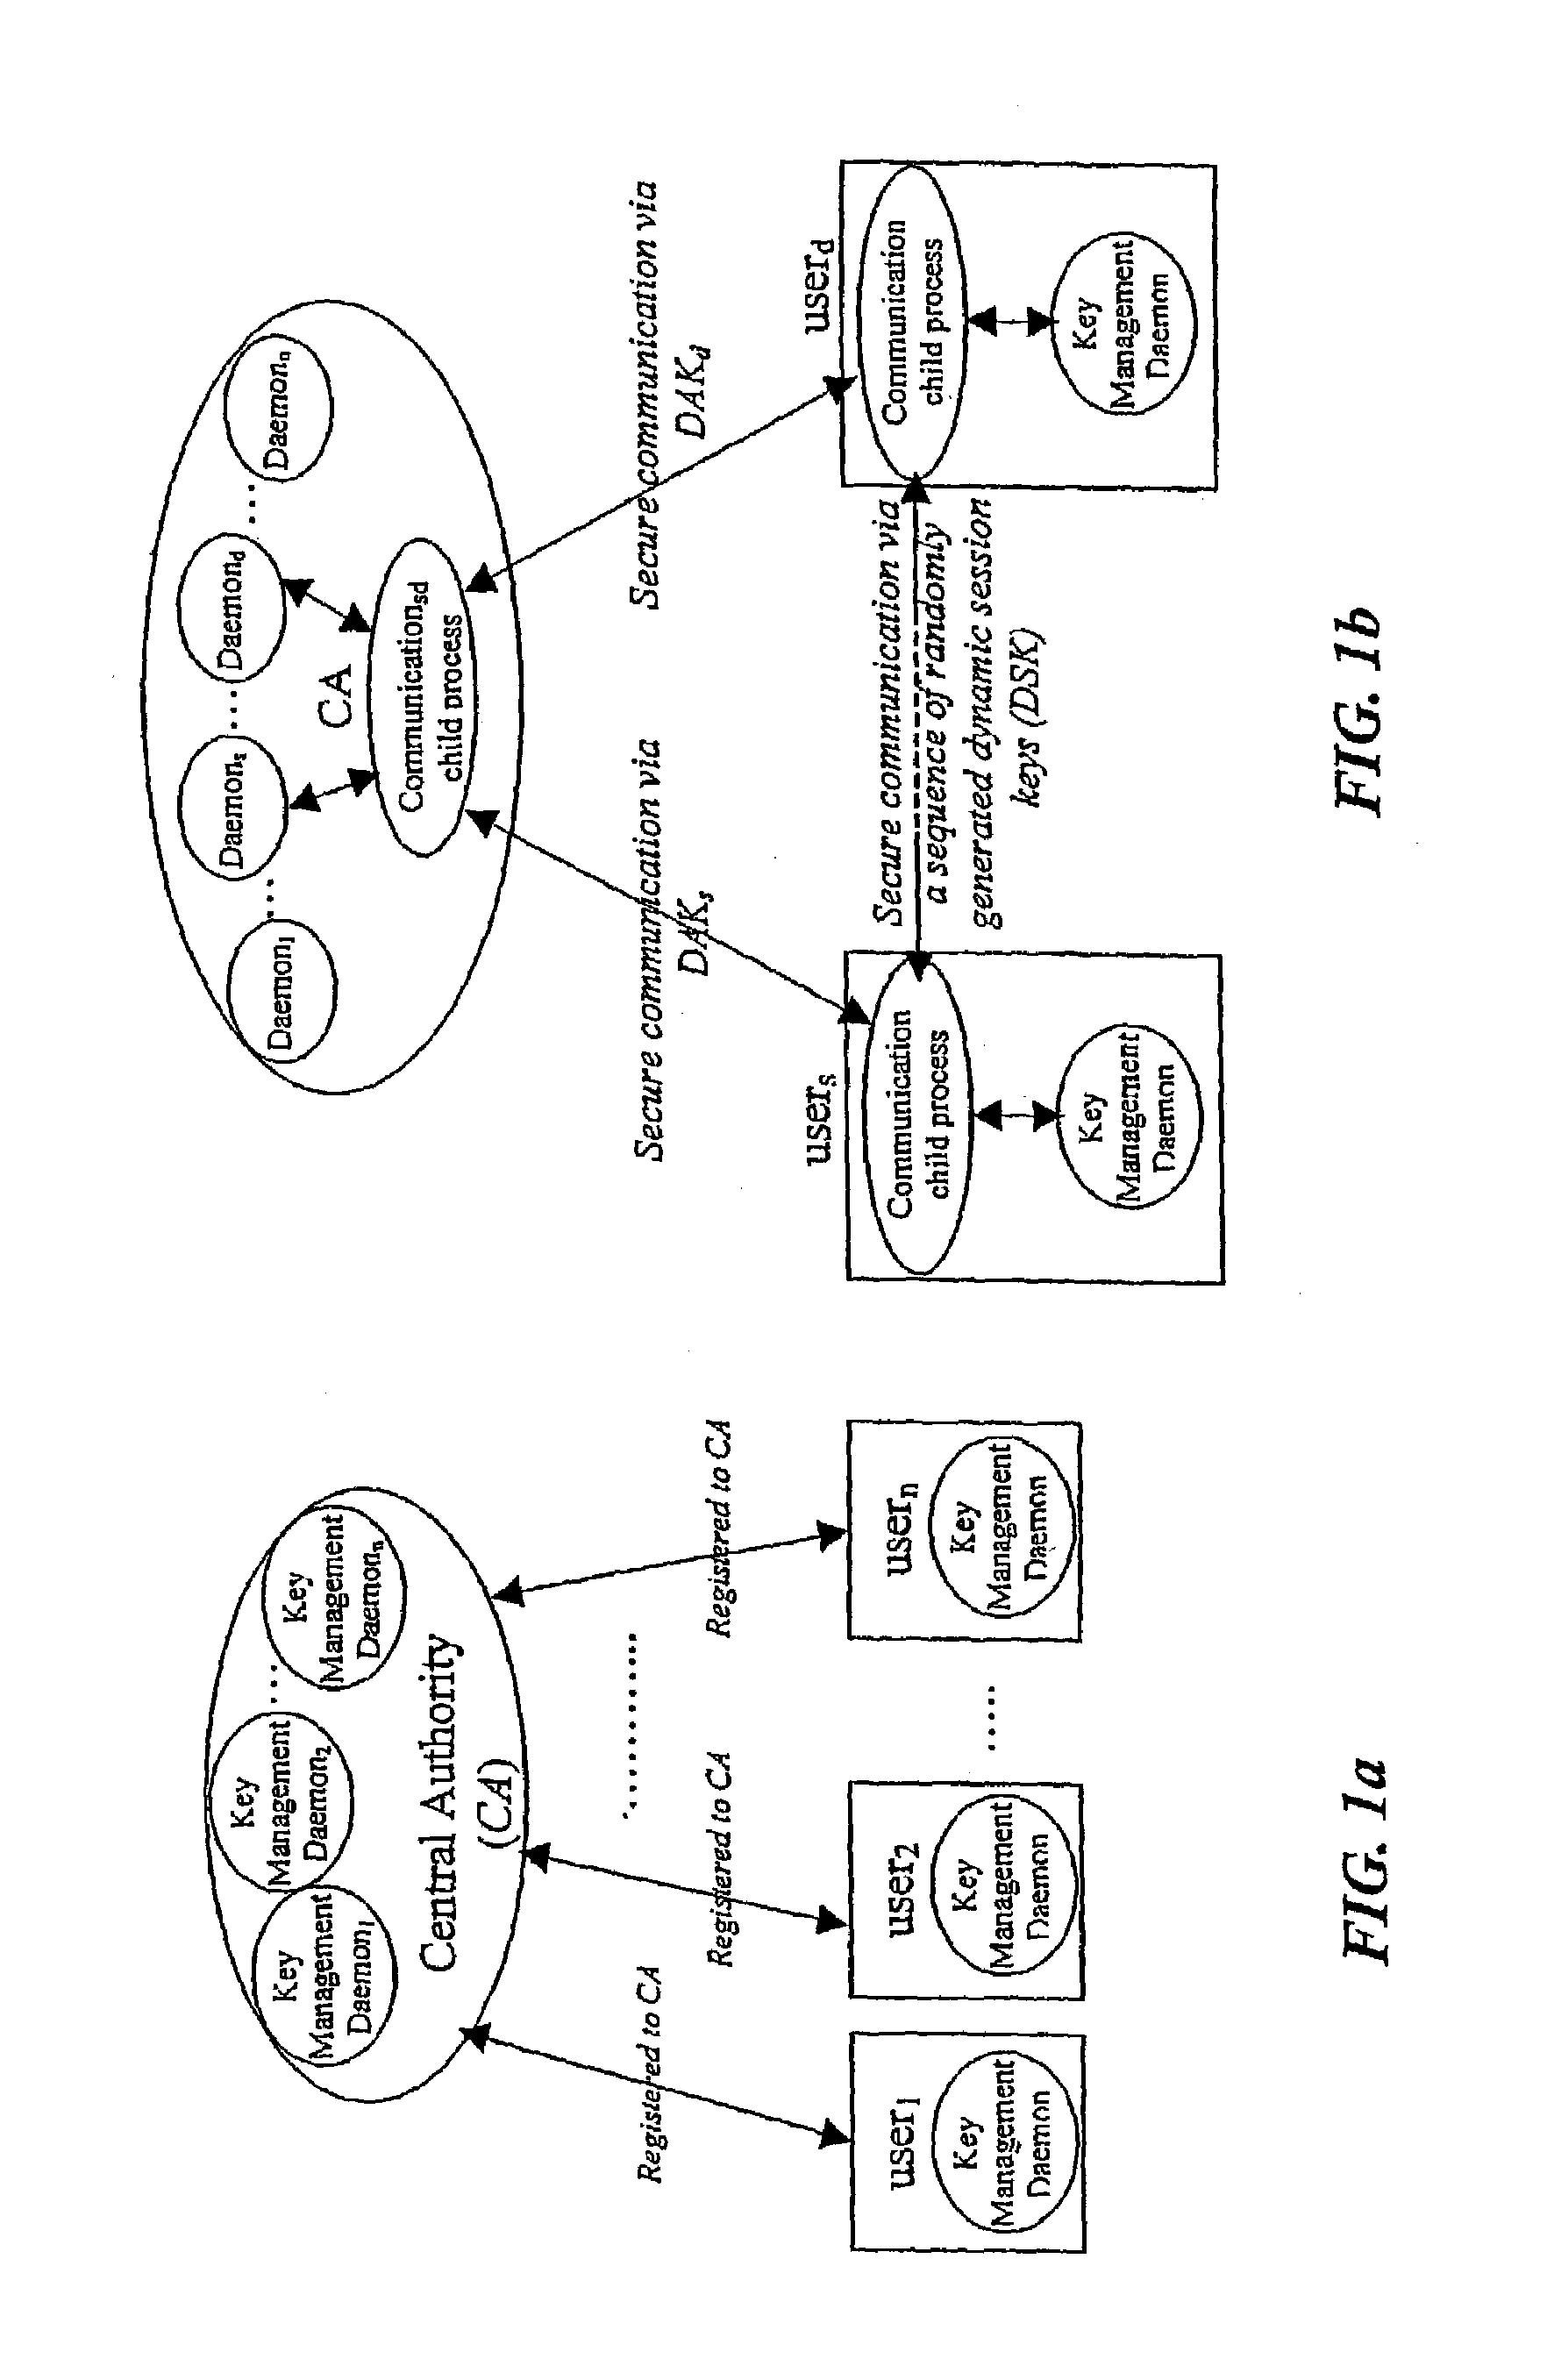 Dynamic security authentication for wireless communication networks